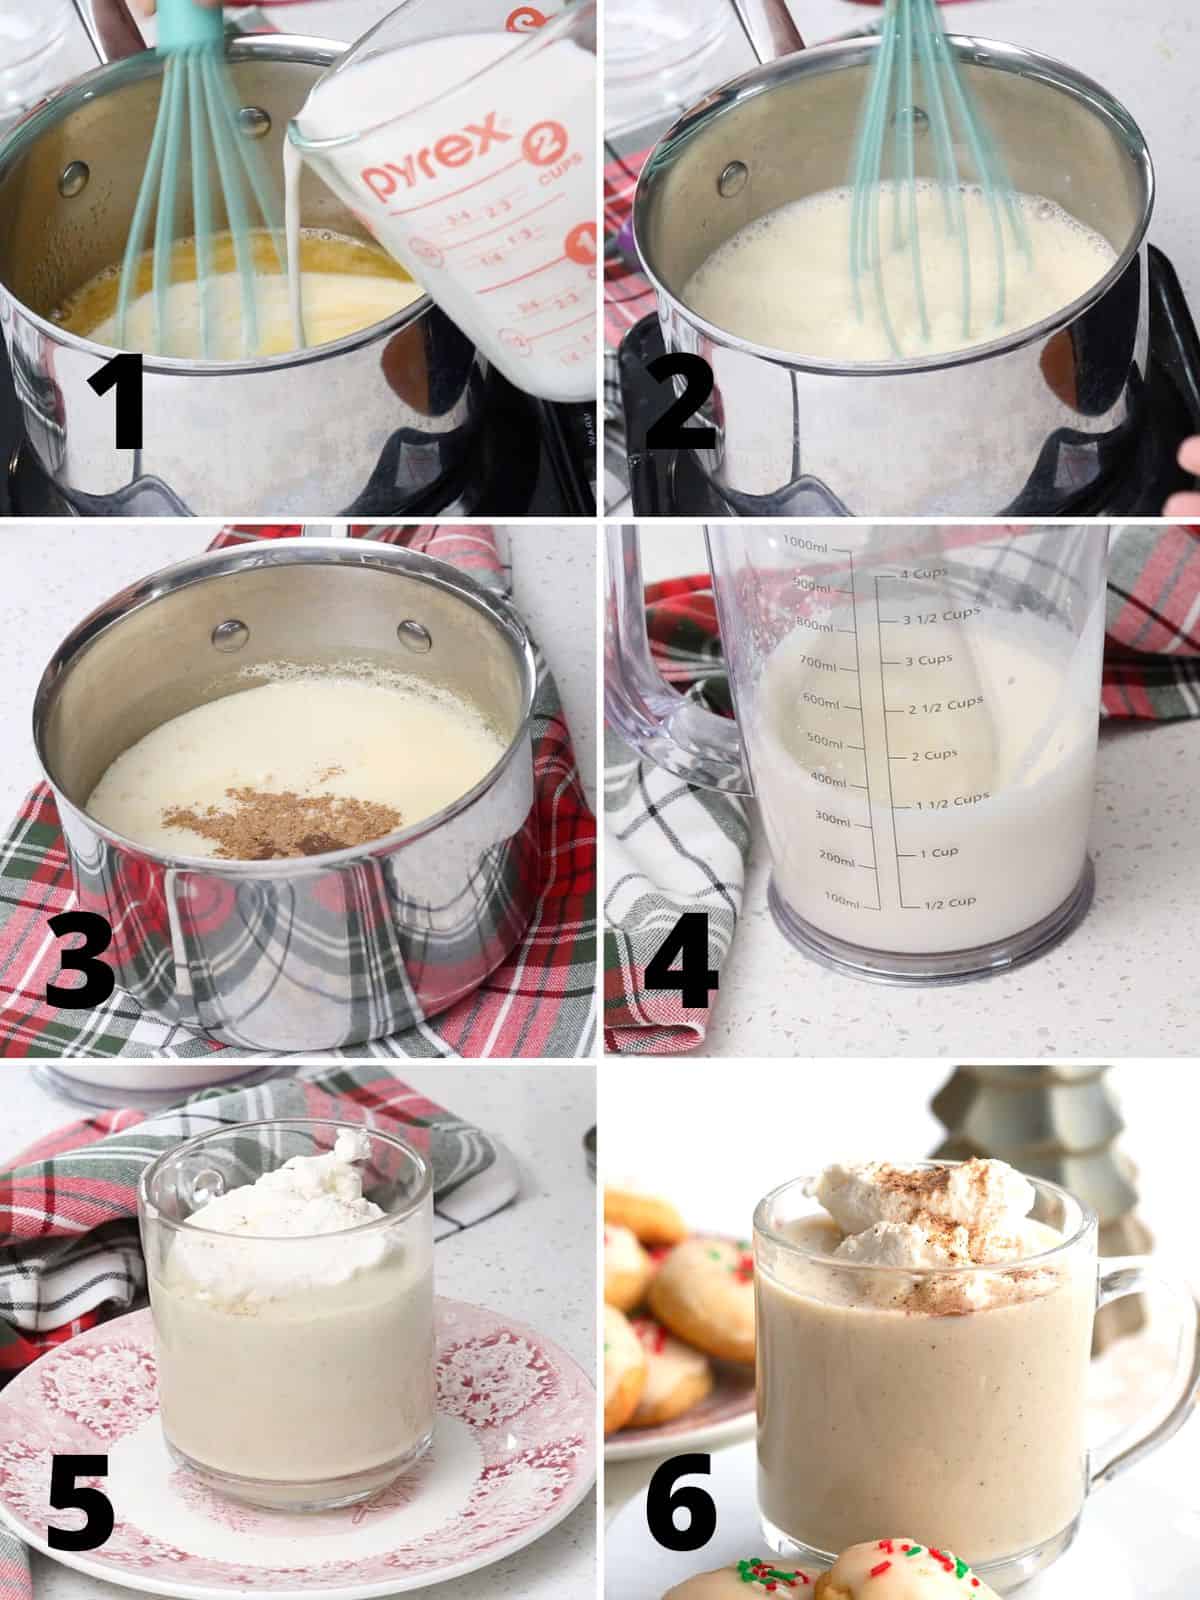 A collage of 6 images showing the steps for making keto eggnog.